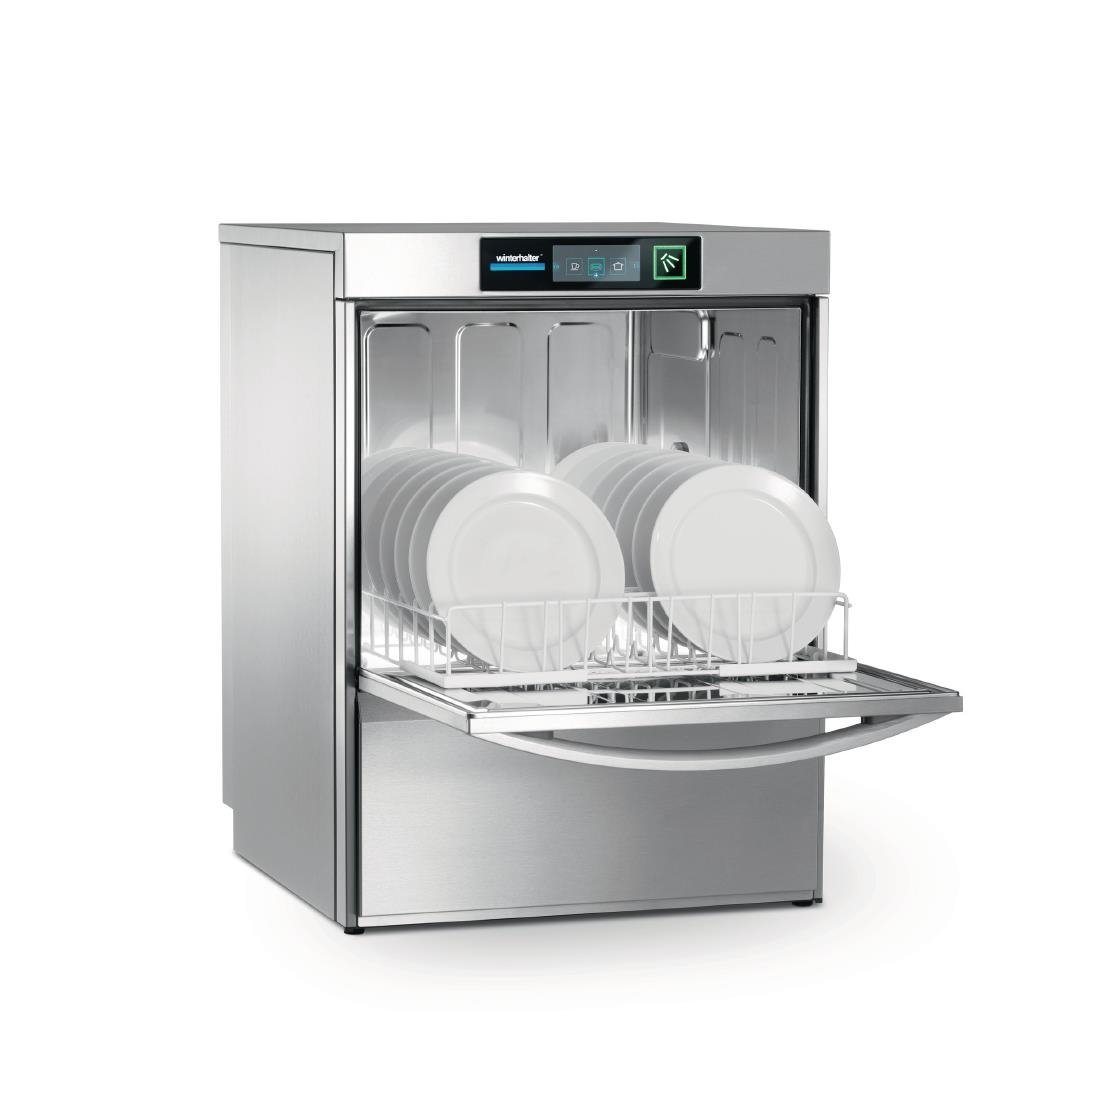 FD300 Winterhalter Undercounter Thermal Disinfection Dishwasher UC-L JD Catering Equipment Solutions Ltd